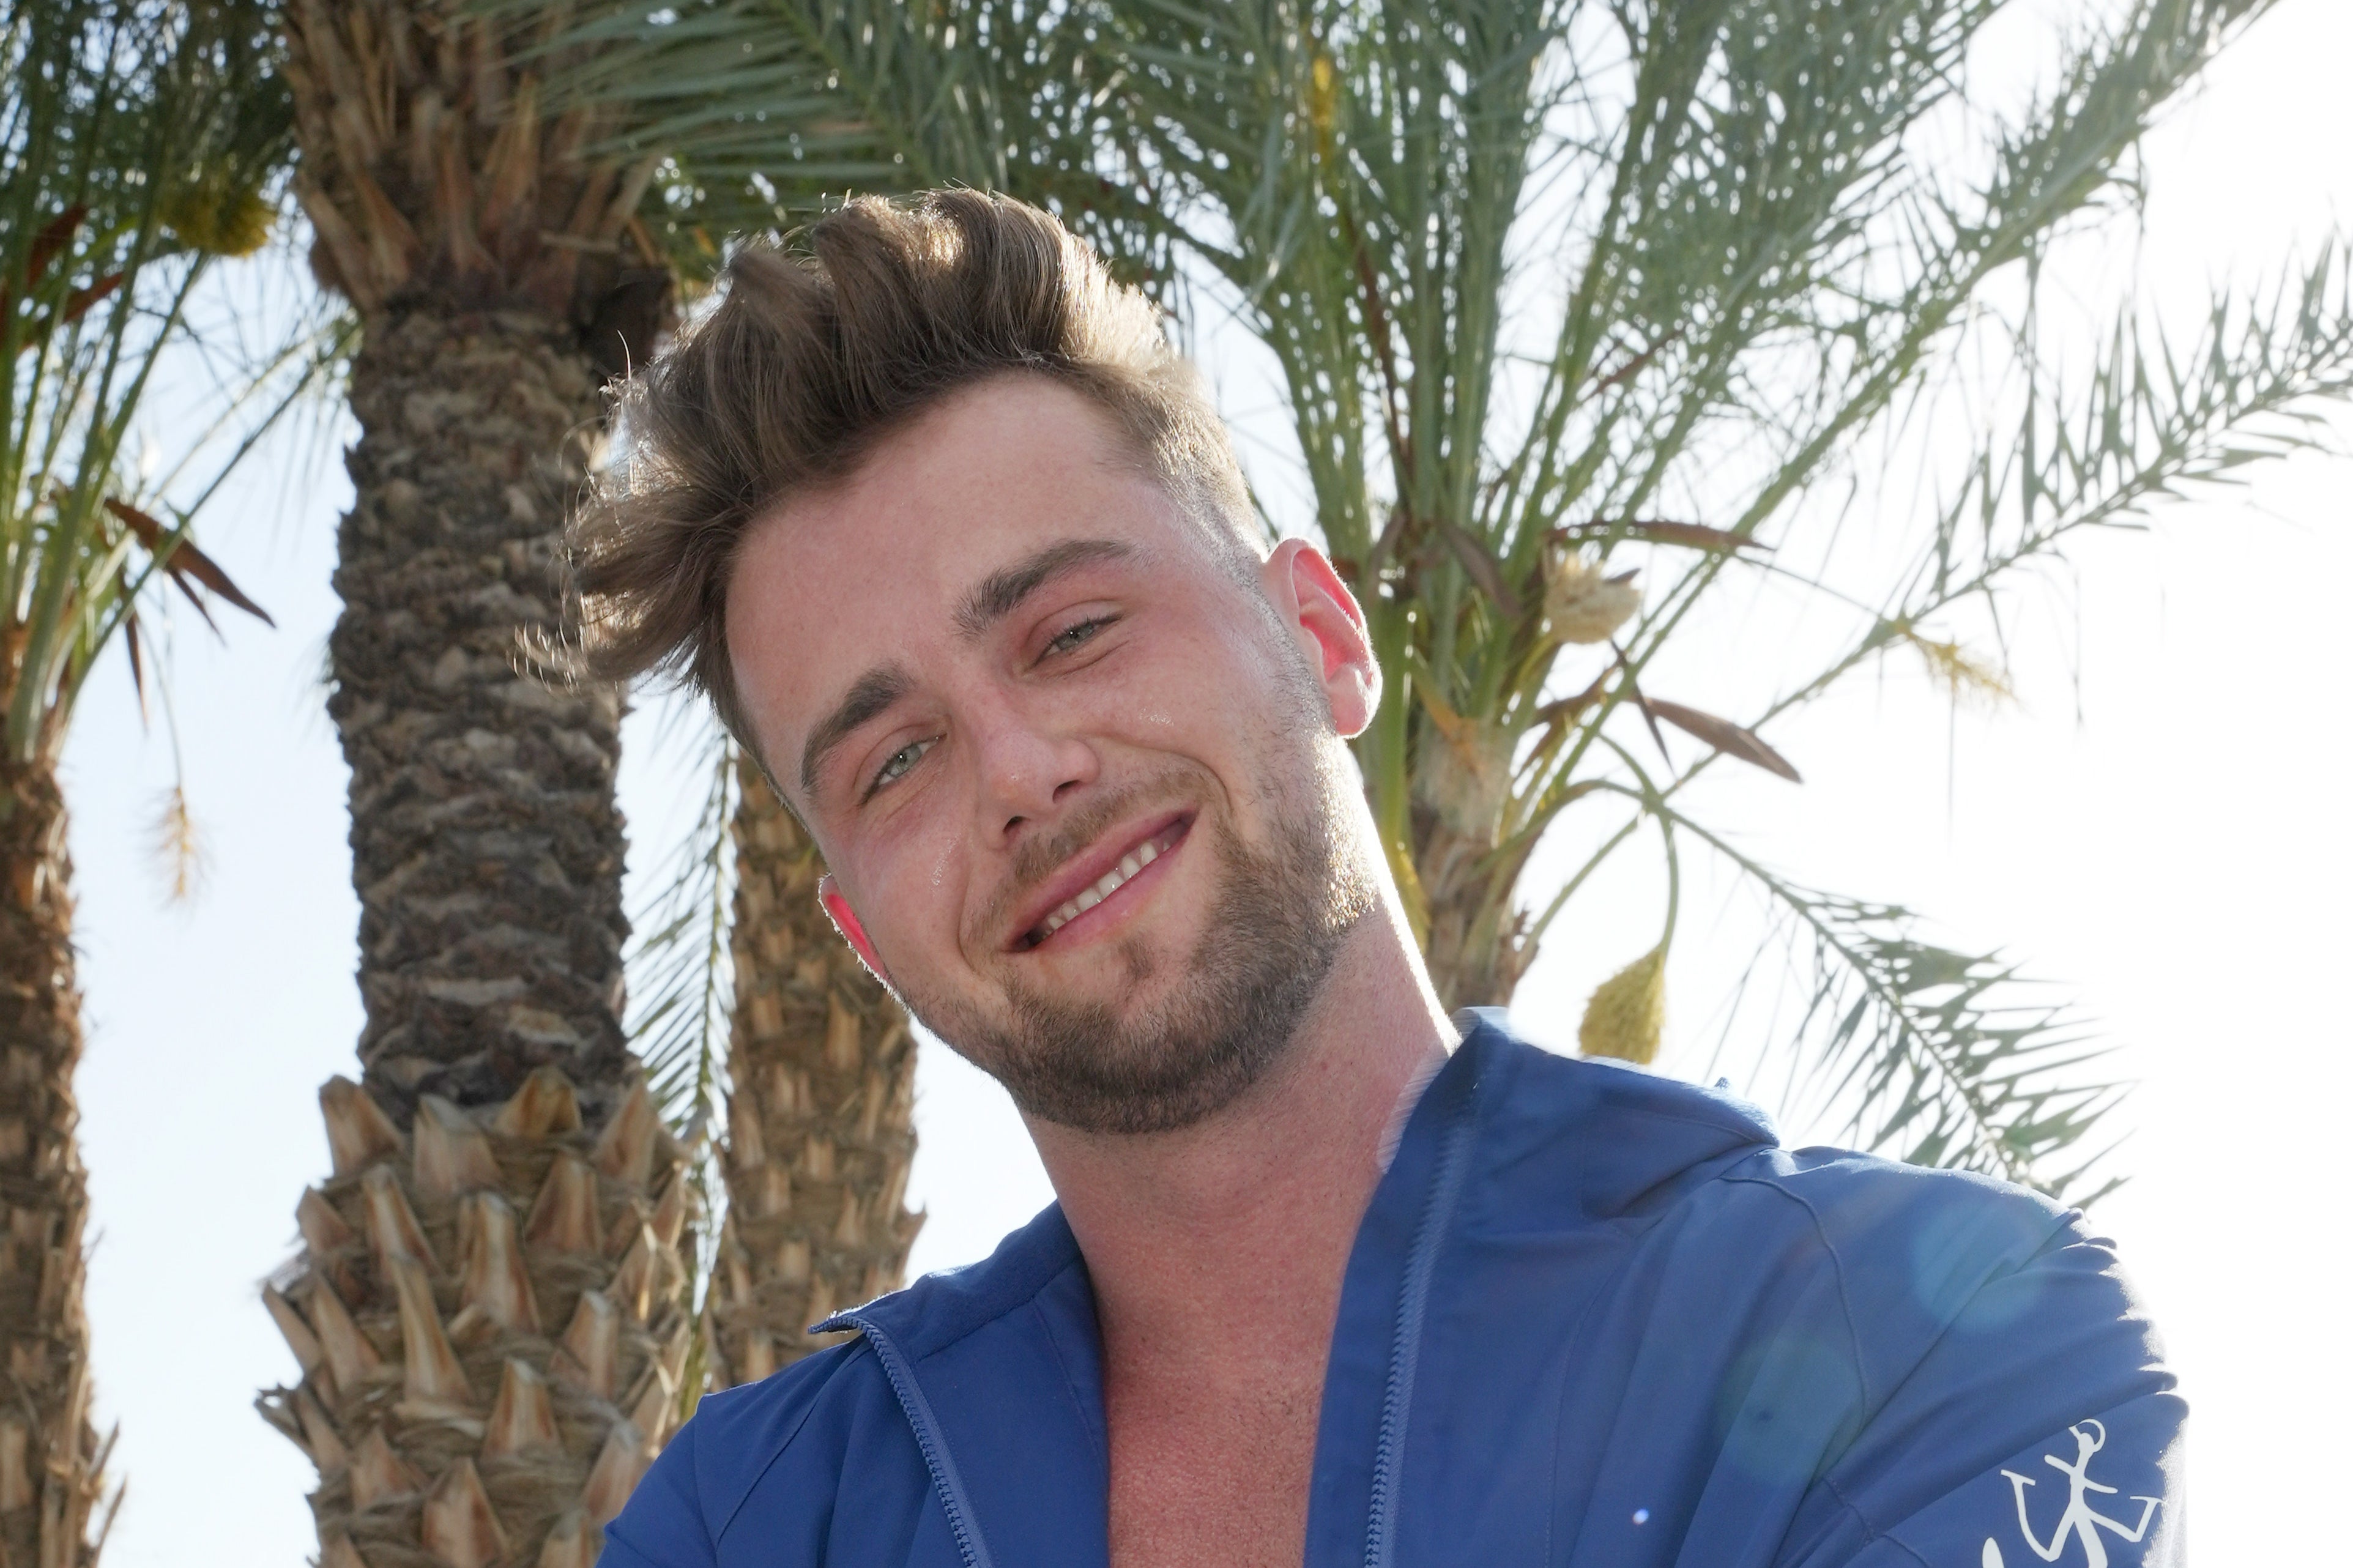 Harry Jowsey reveals what he’s learned from his skin cancer diagnosis